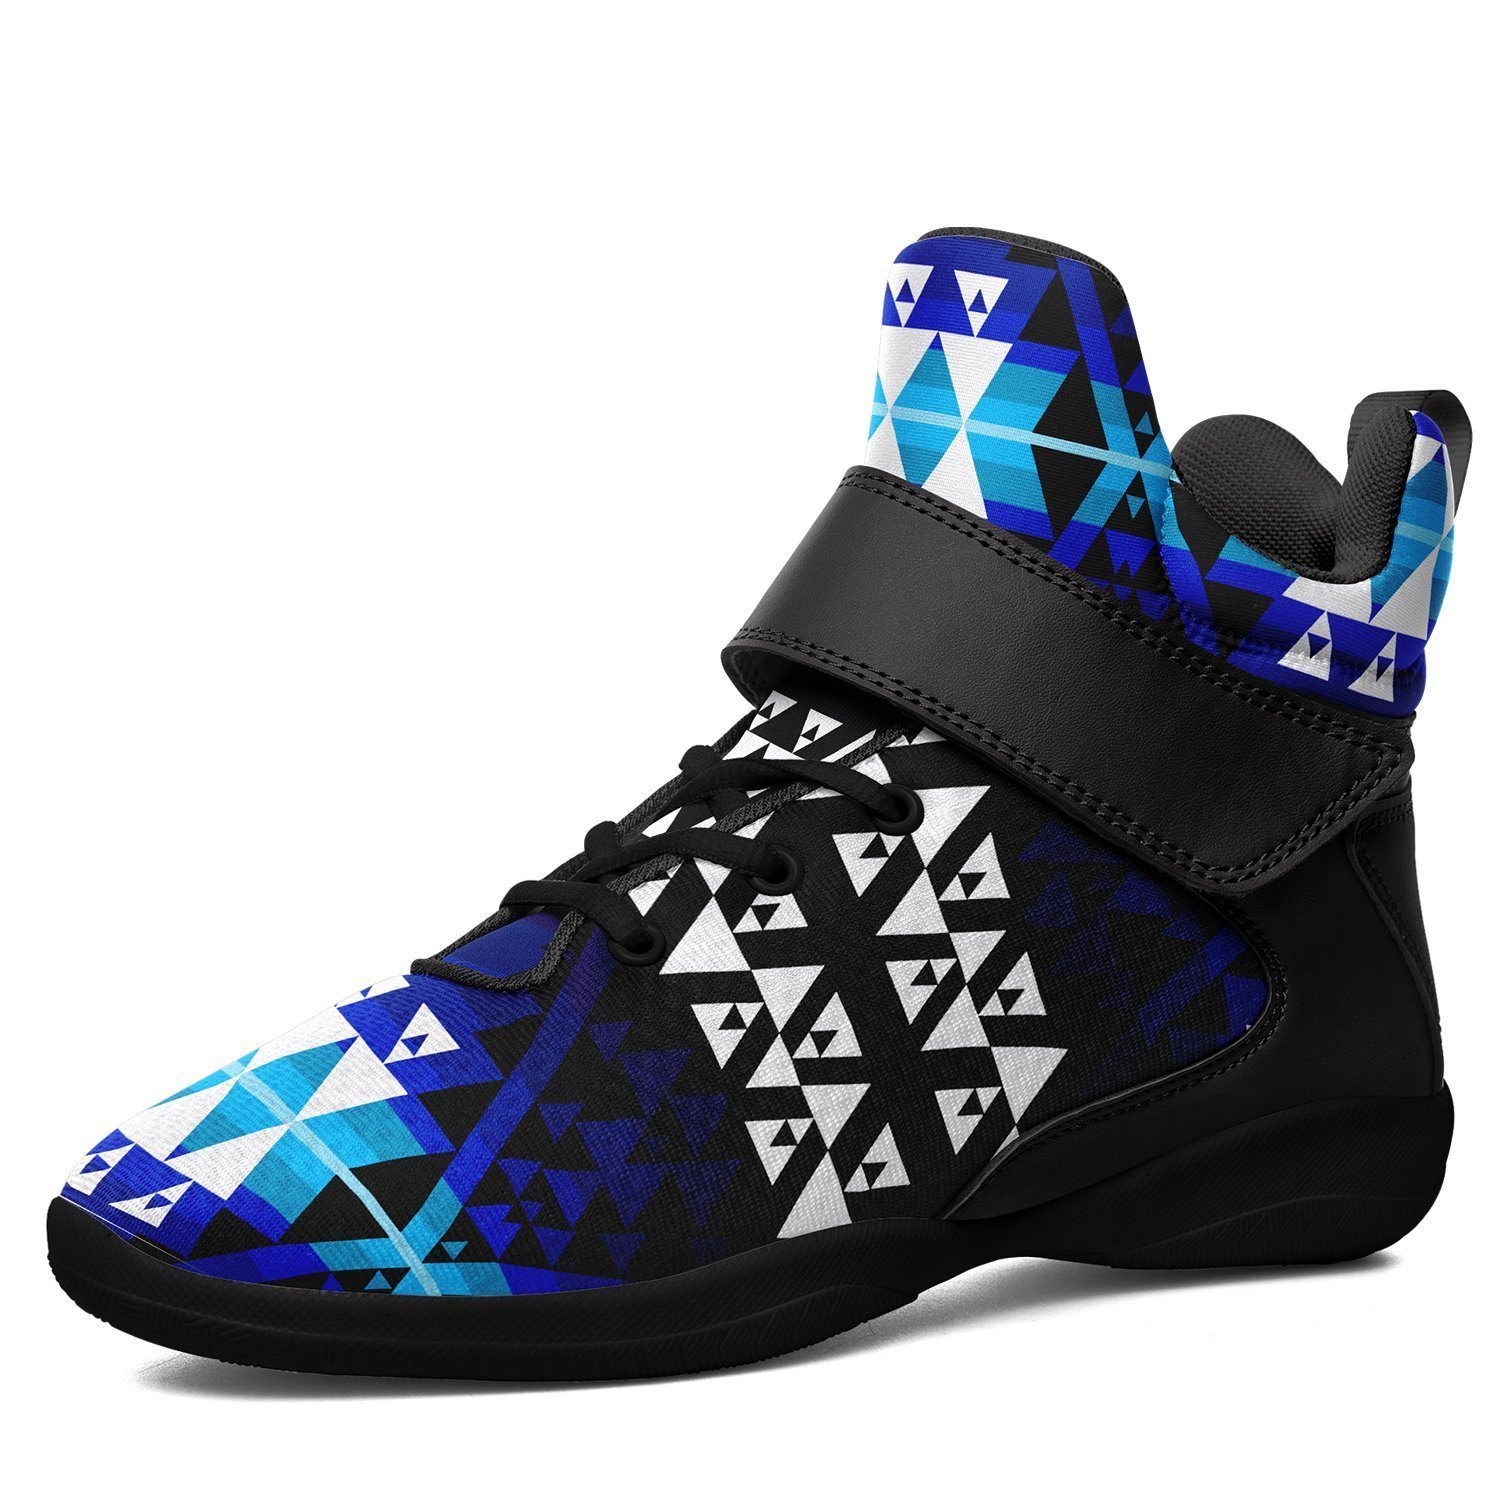 Writing on Stone Night Watch Ipottaa Basketball / Sport High Top Shoes - Black Sole 49 Dzine US Men 7 / EUR 40 Black Sole with Black Strap 